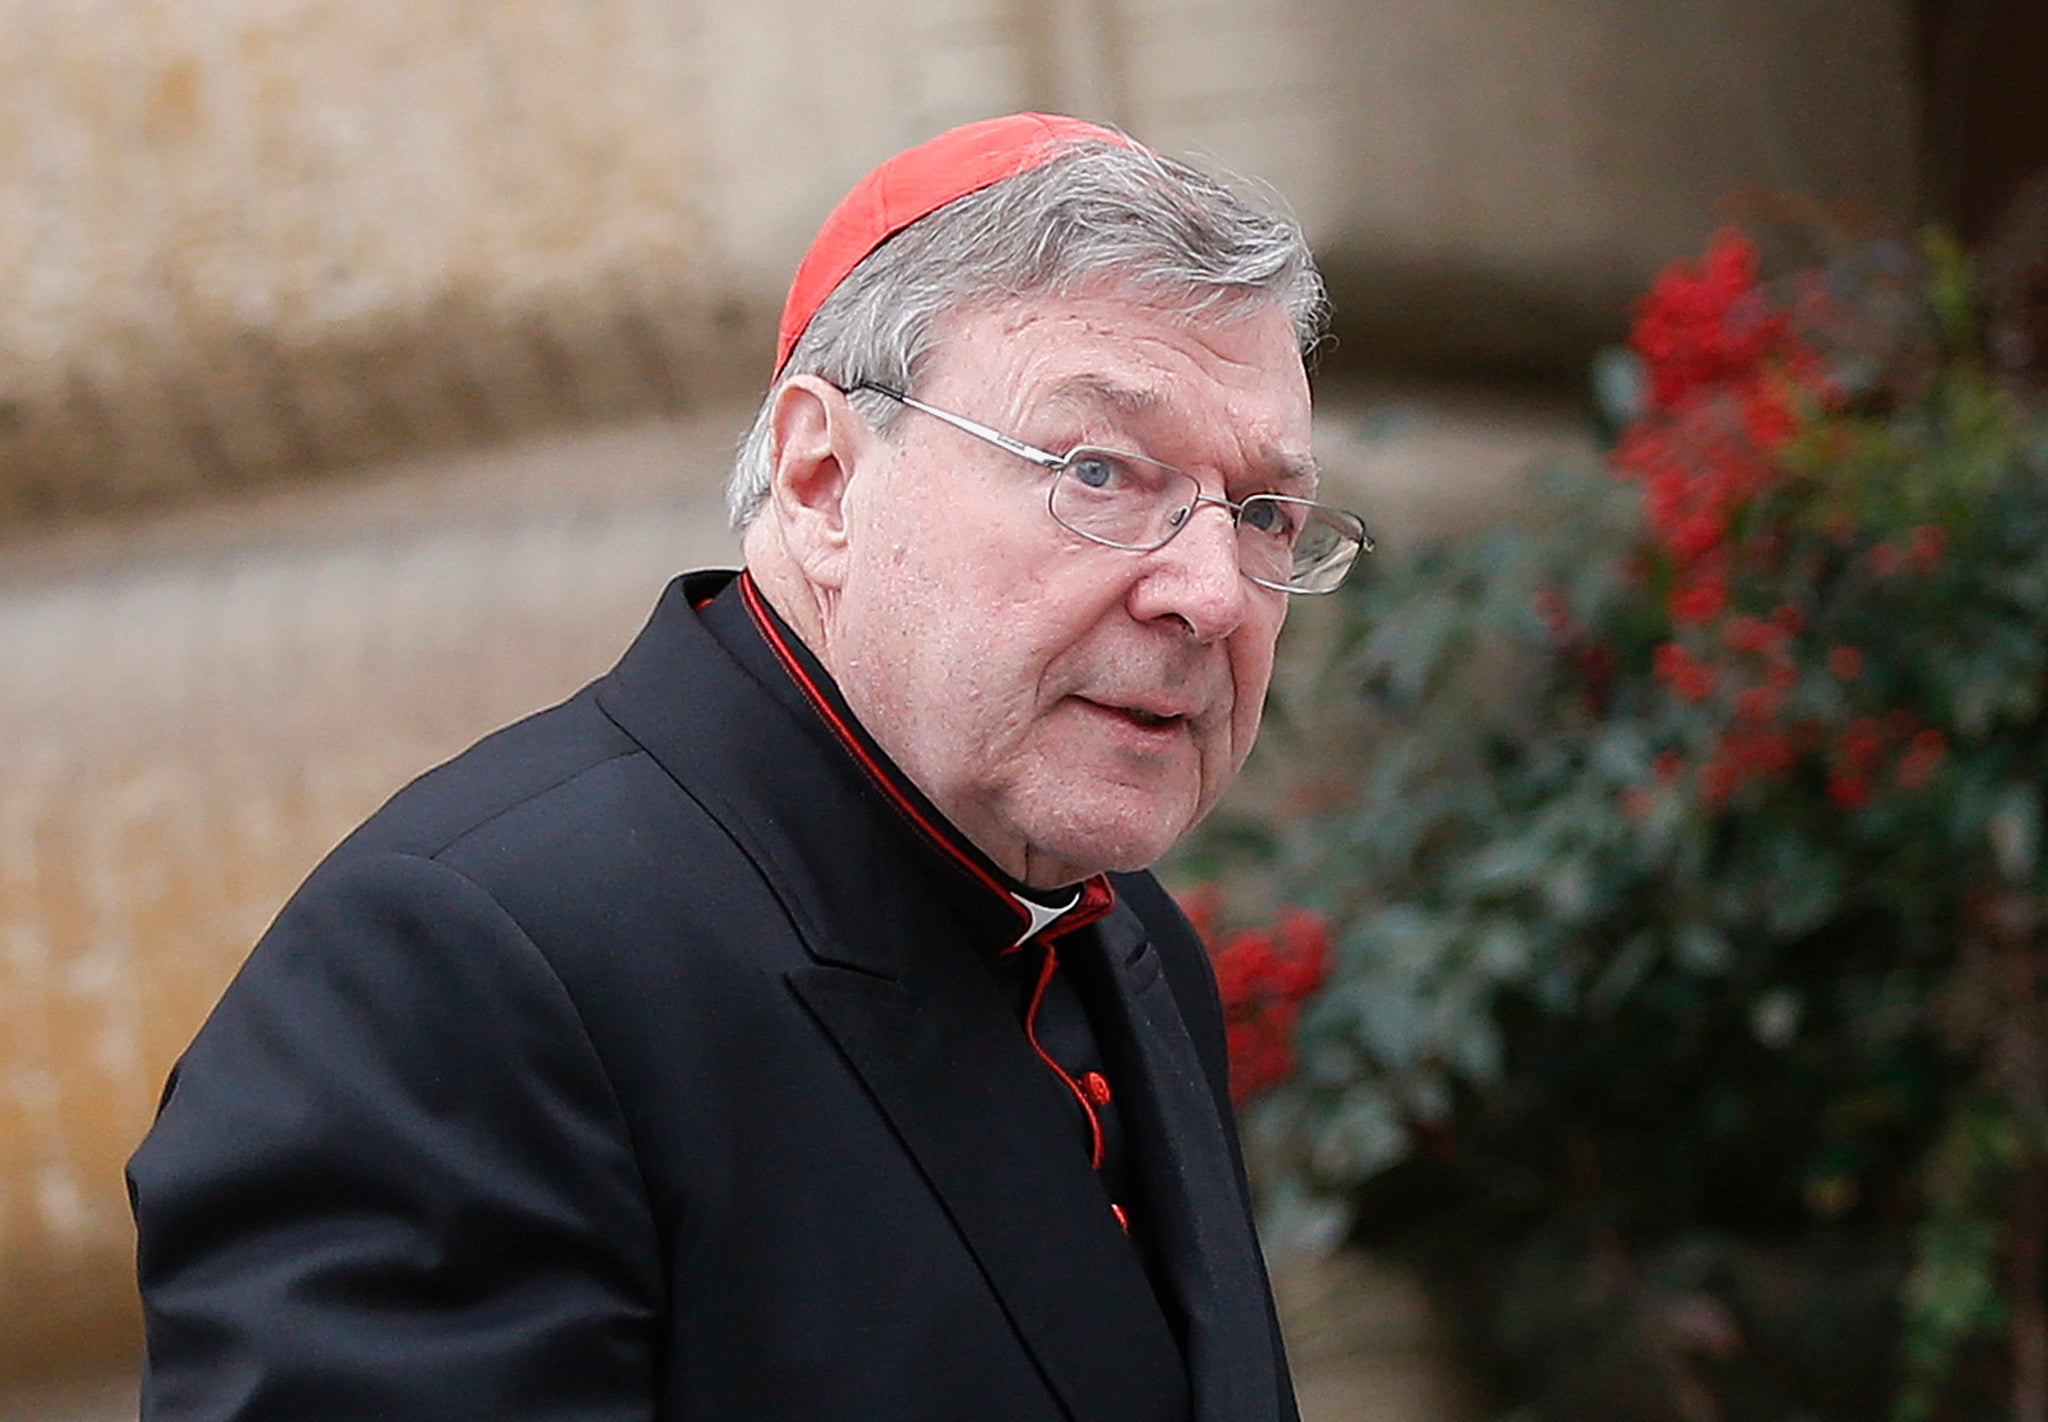 Cardinal George Pell was charged with historical sexual assault offences last year.